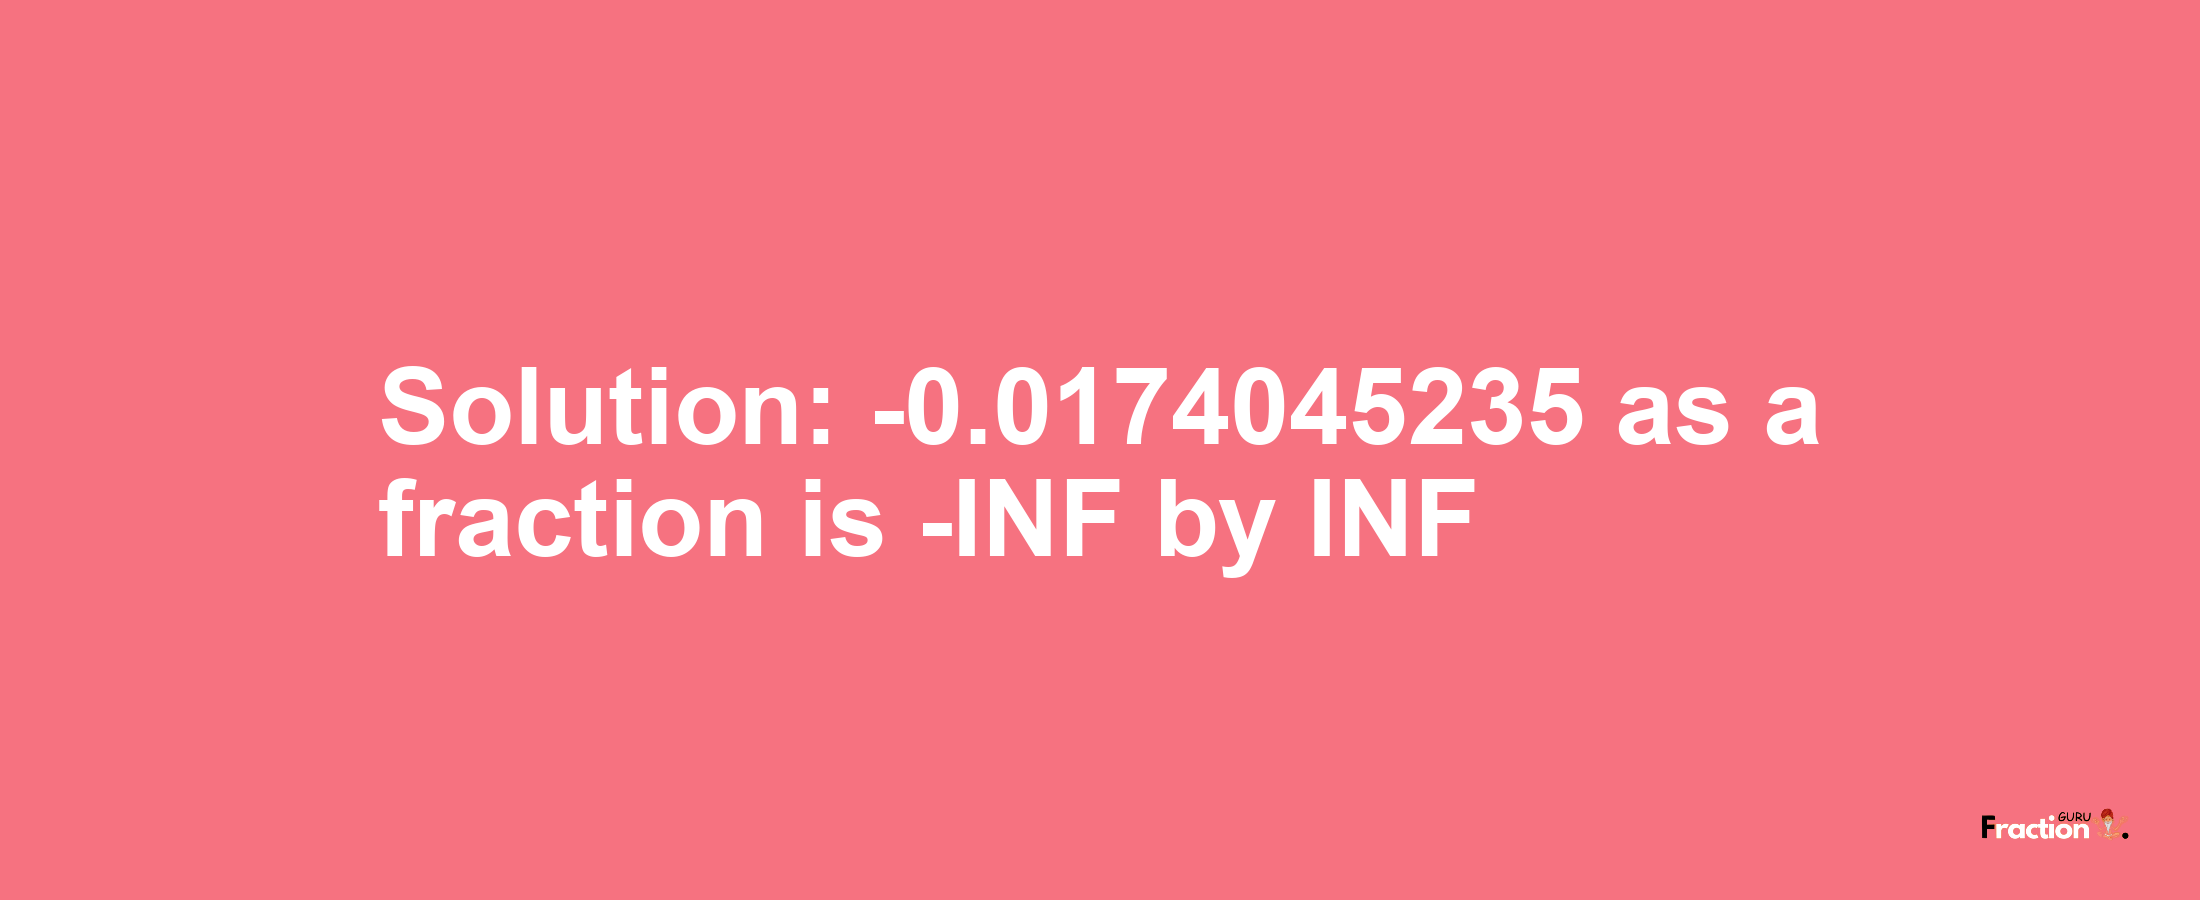 Solution:-0.0174045235 as a fraction is -INF/INF